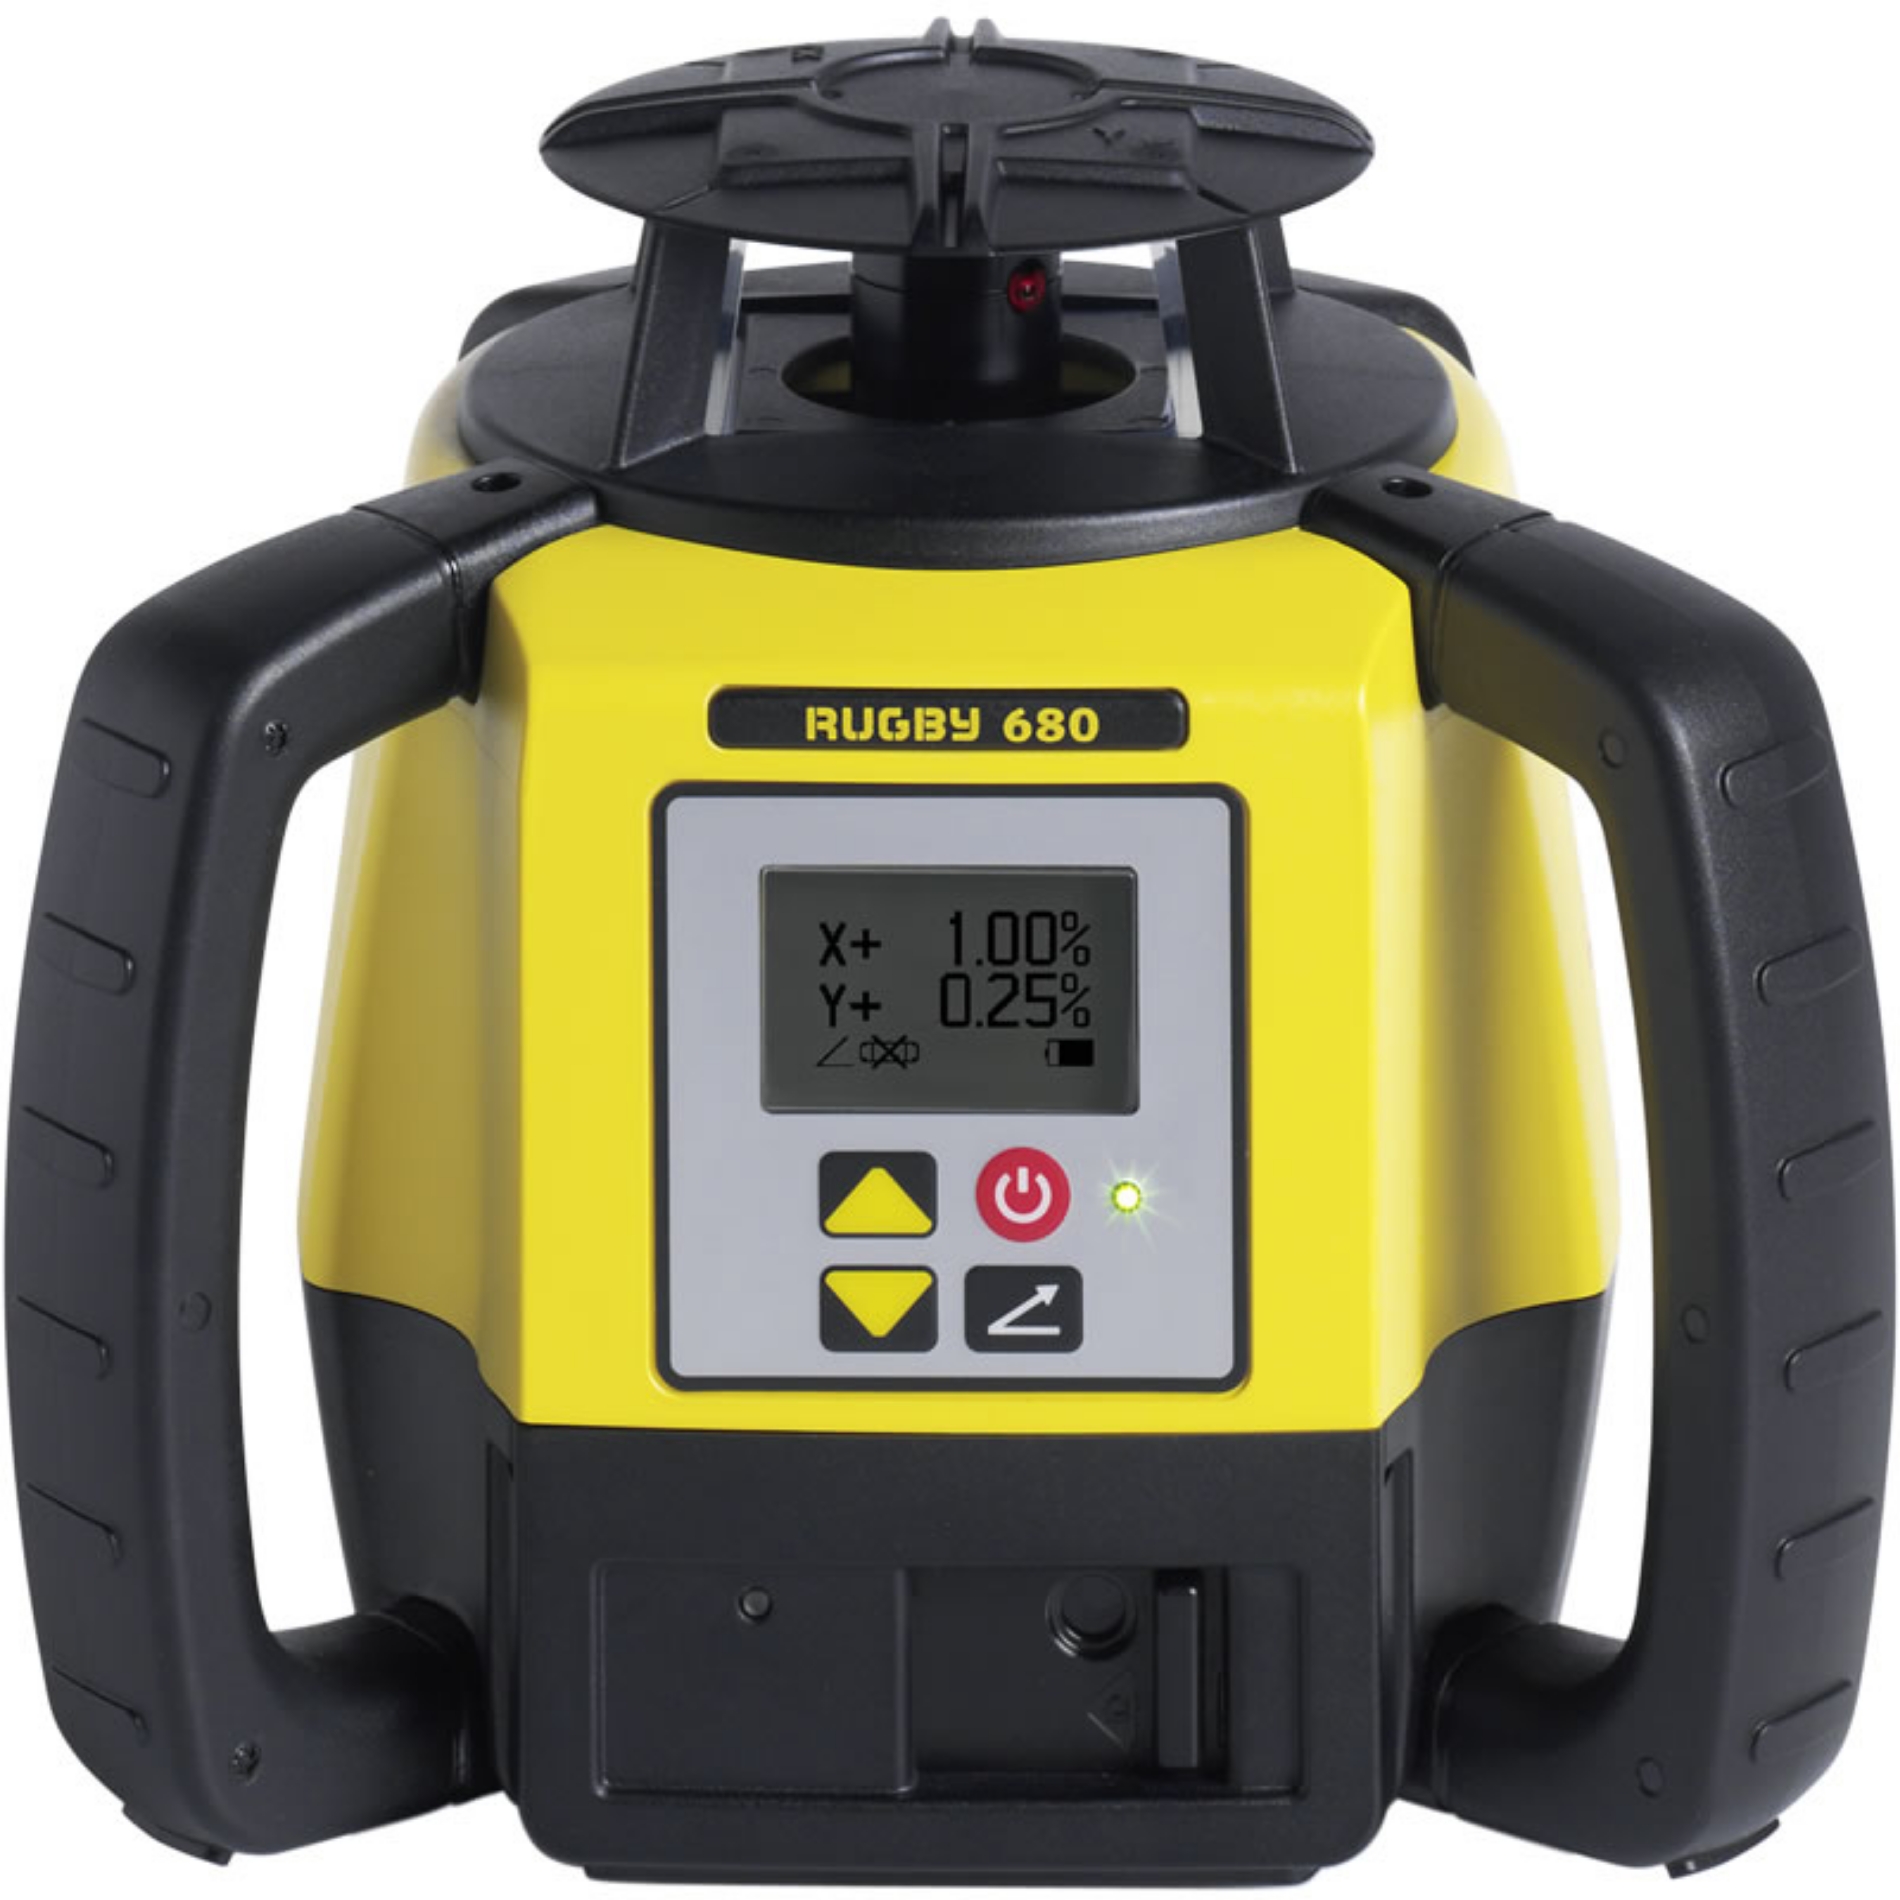 Picture of Leica Rugby 680 Laser Level Bundle 1